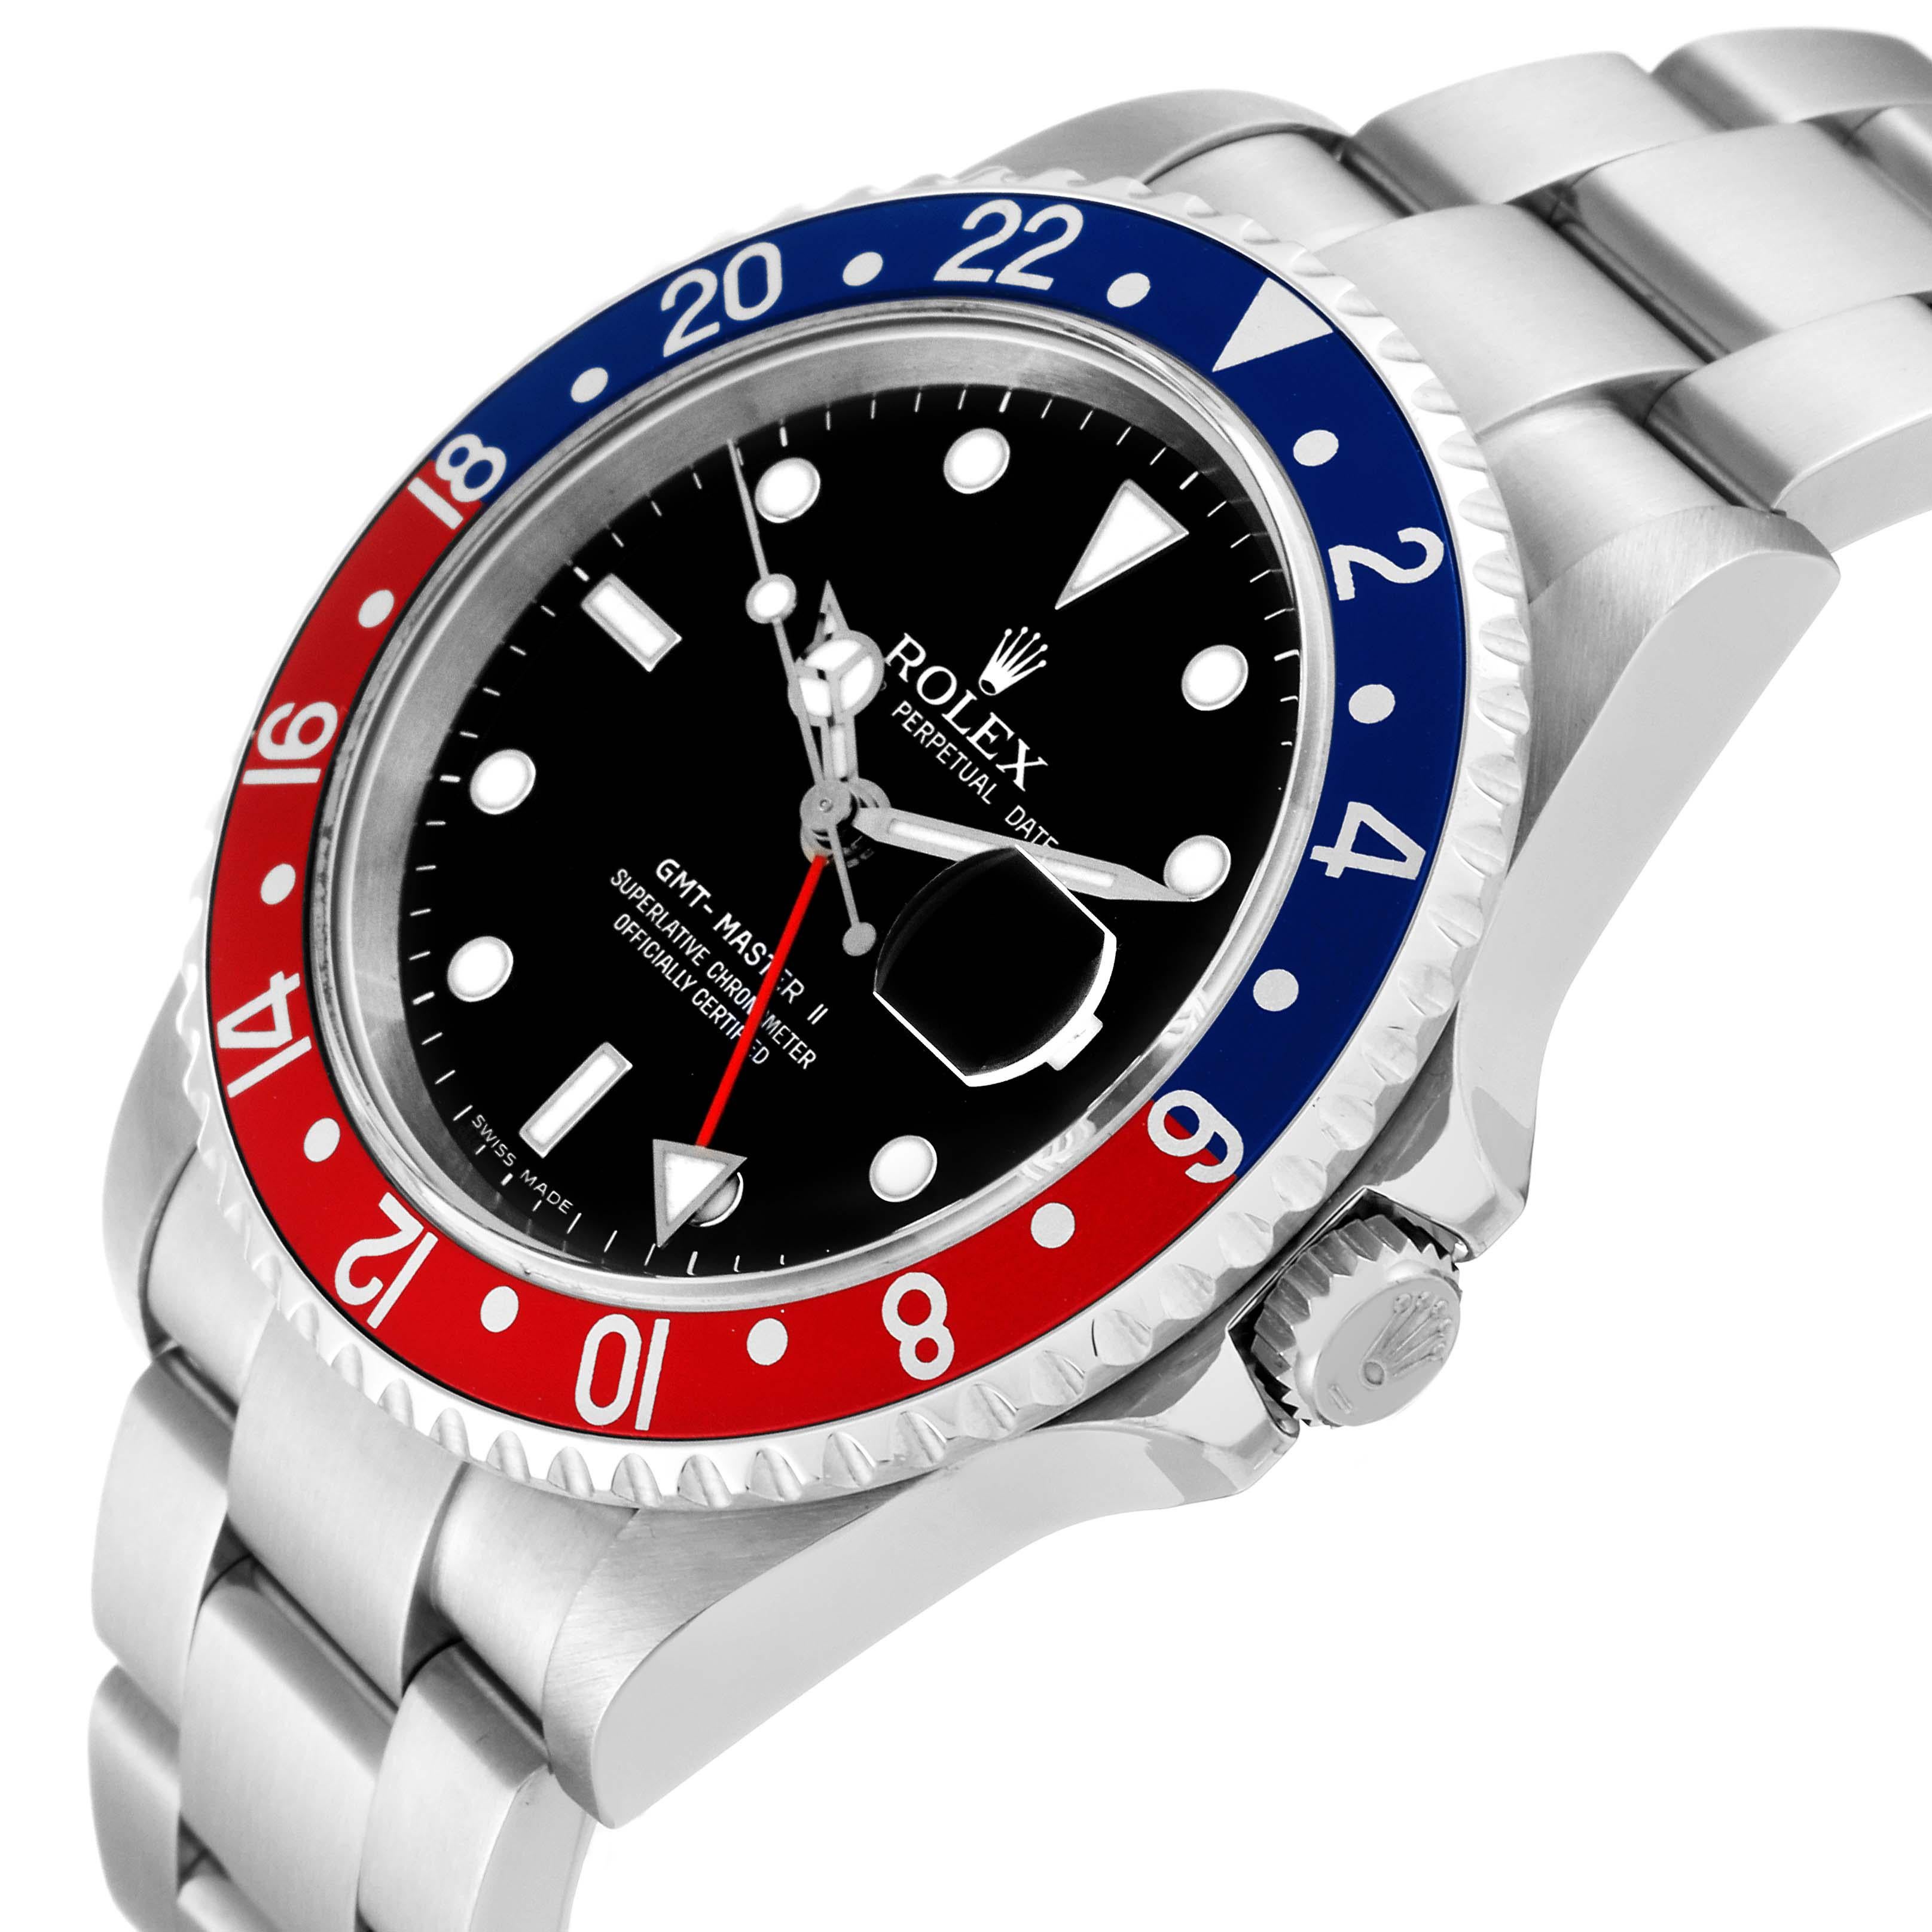 Rolex GMT Master II Blue Red Pepsi Error Dial Steel Mens Watch 16710 Box Papers 1